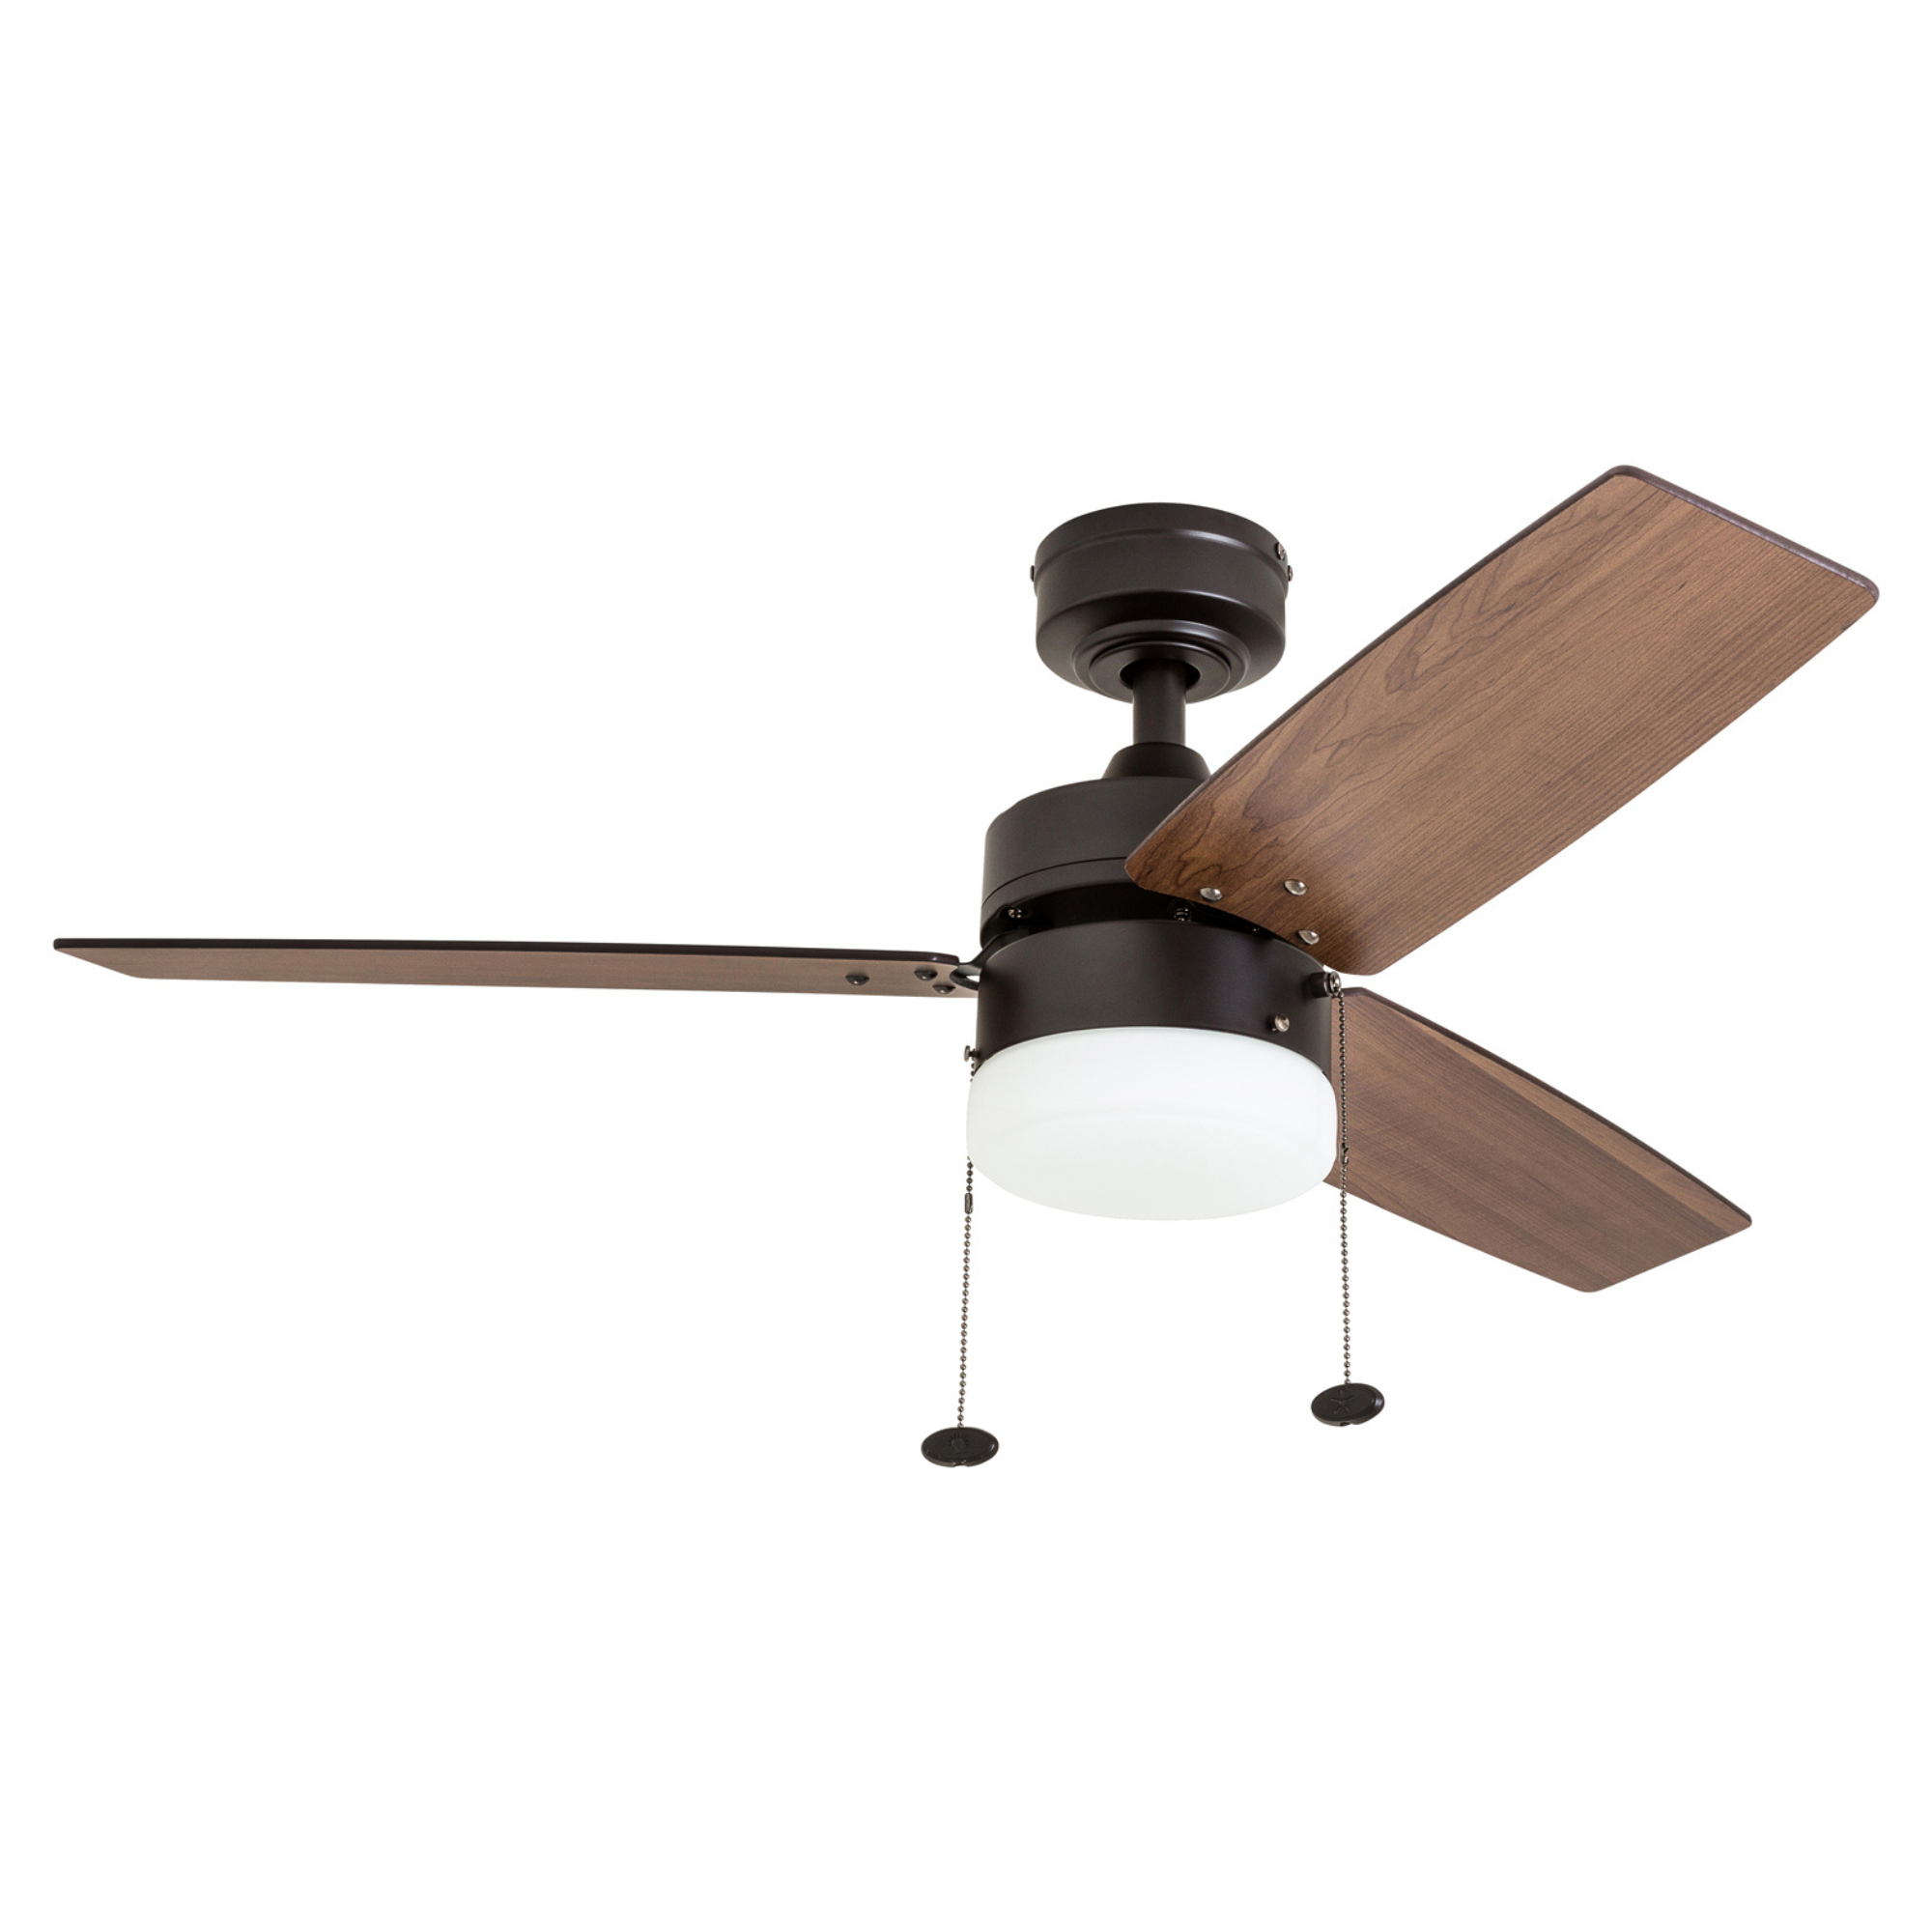 42 Inch Reston, Espresso, Pull Chain, Ceiling Fan by Prominence Home